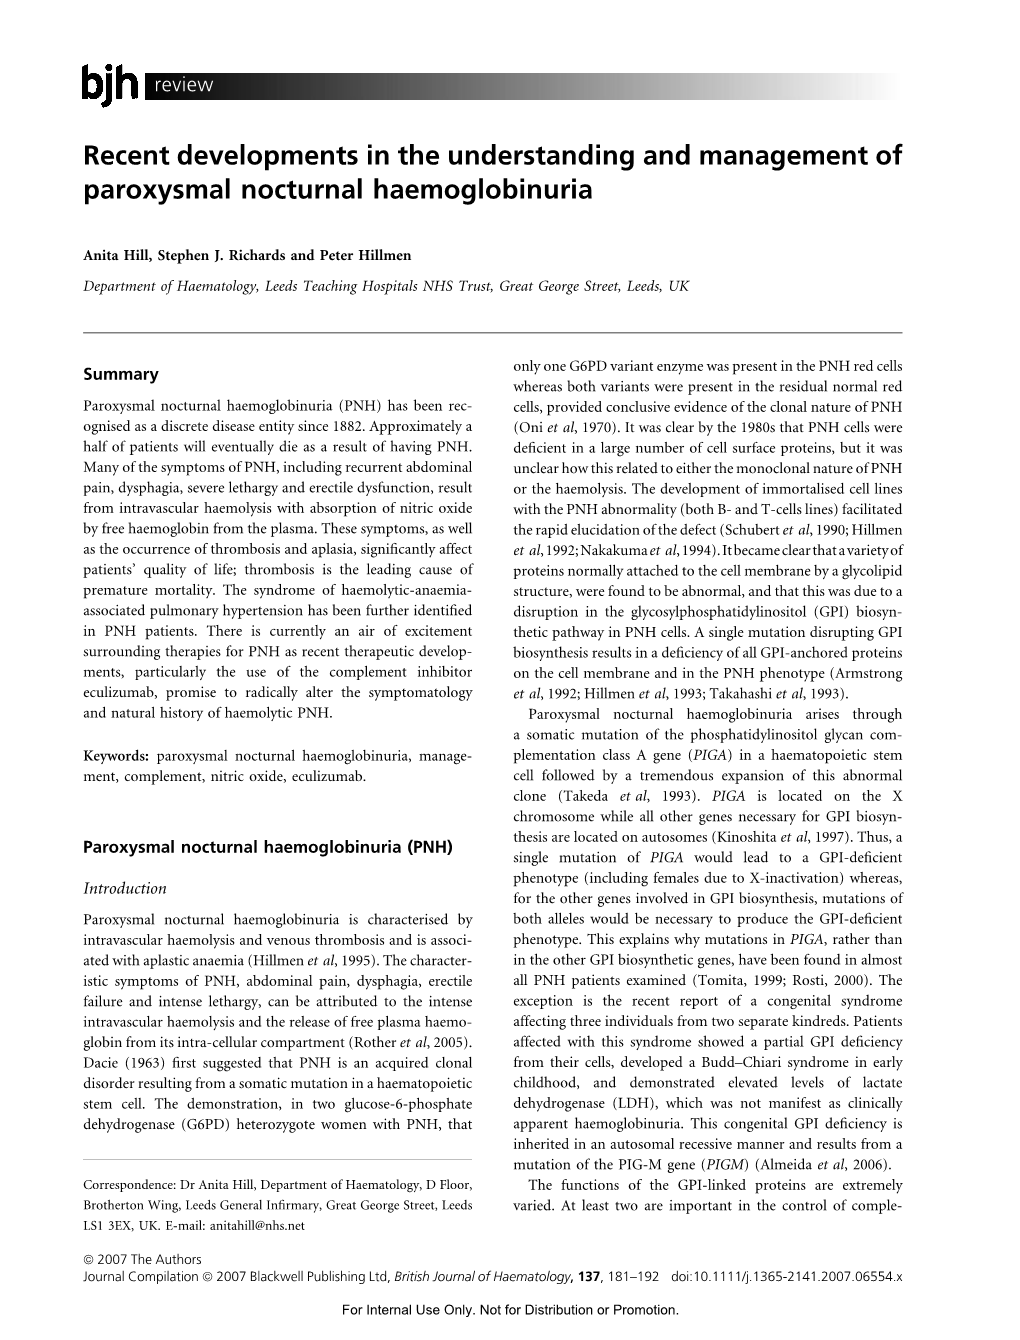 Recent Developments in the Understanding and Management of Paroxysmal Nocturnal Haemoglobinuria